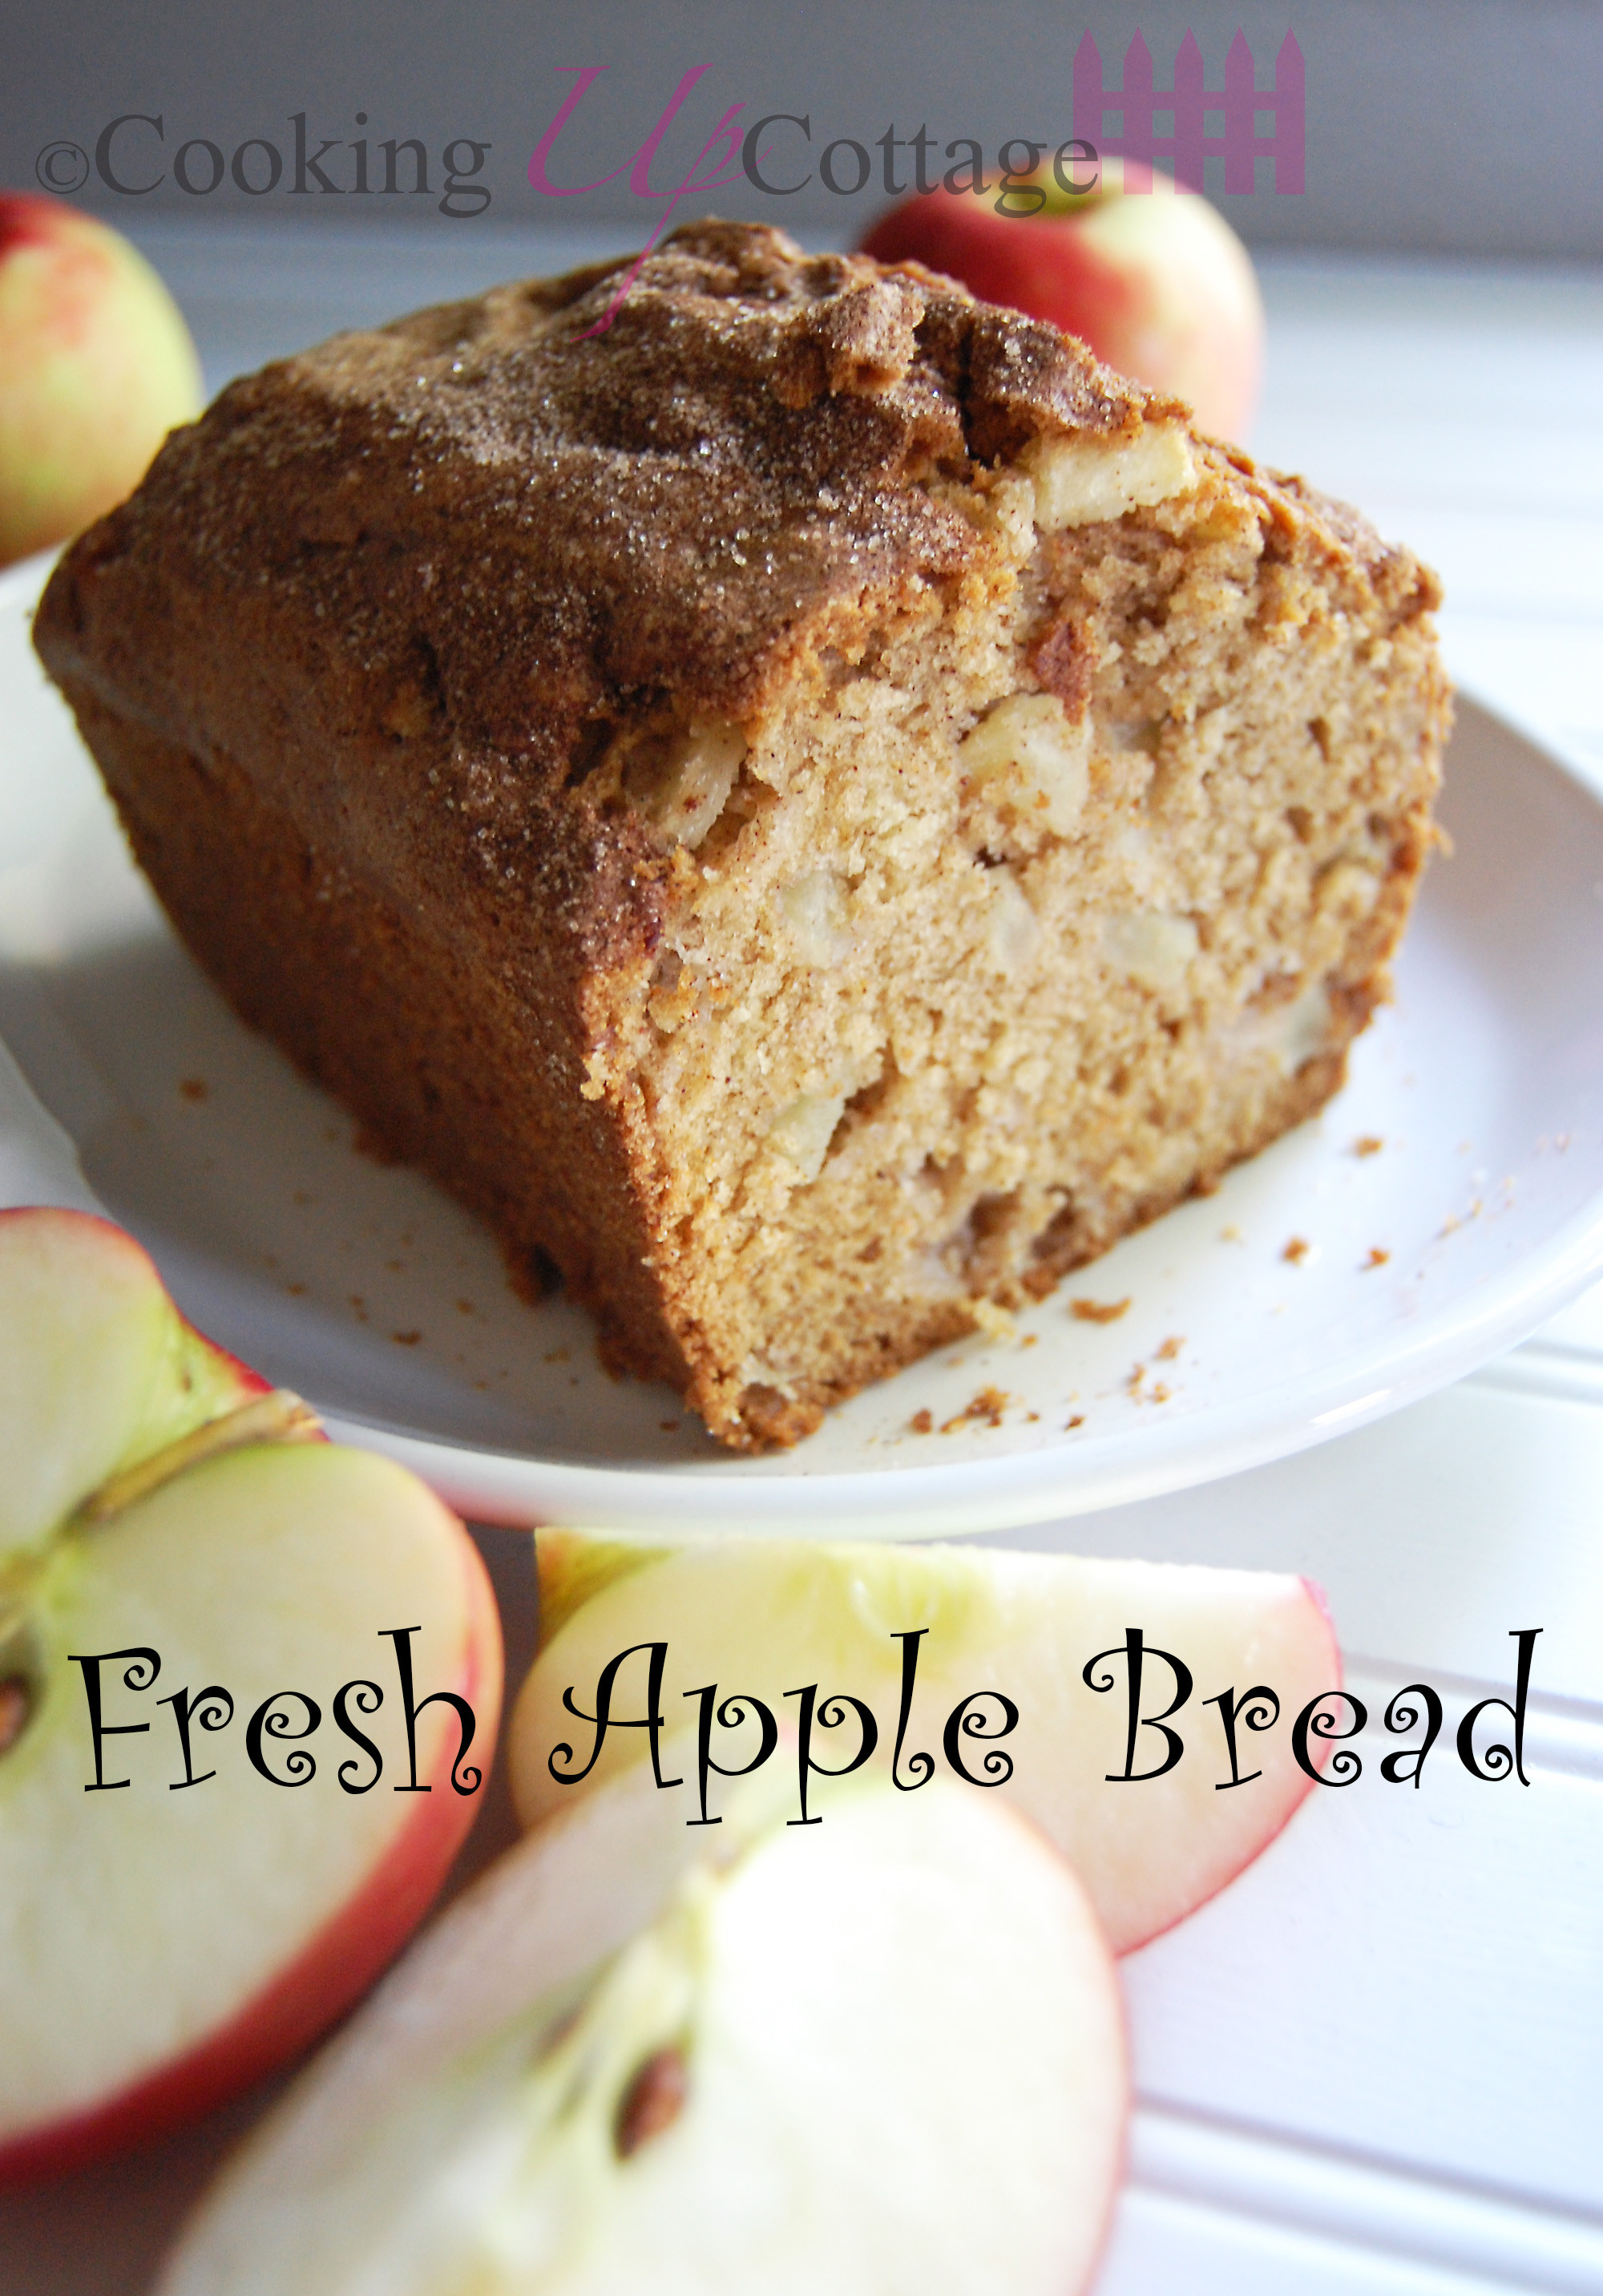 Healthy Apple Bread Recipes With Fresh Apples
 apple bread recipes with fresh apples